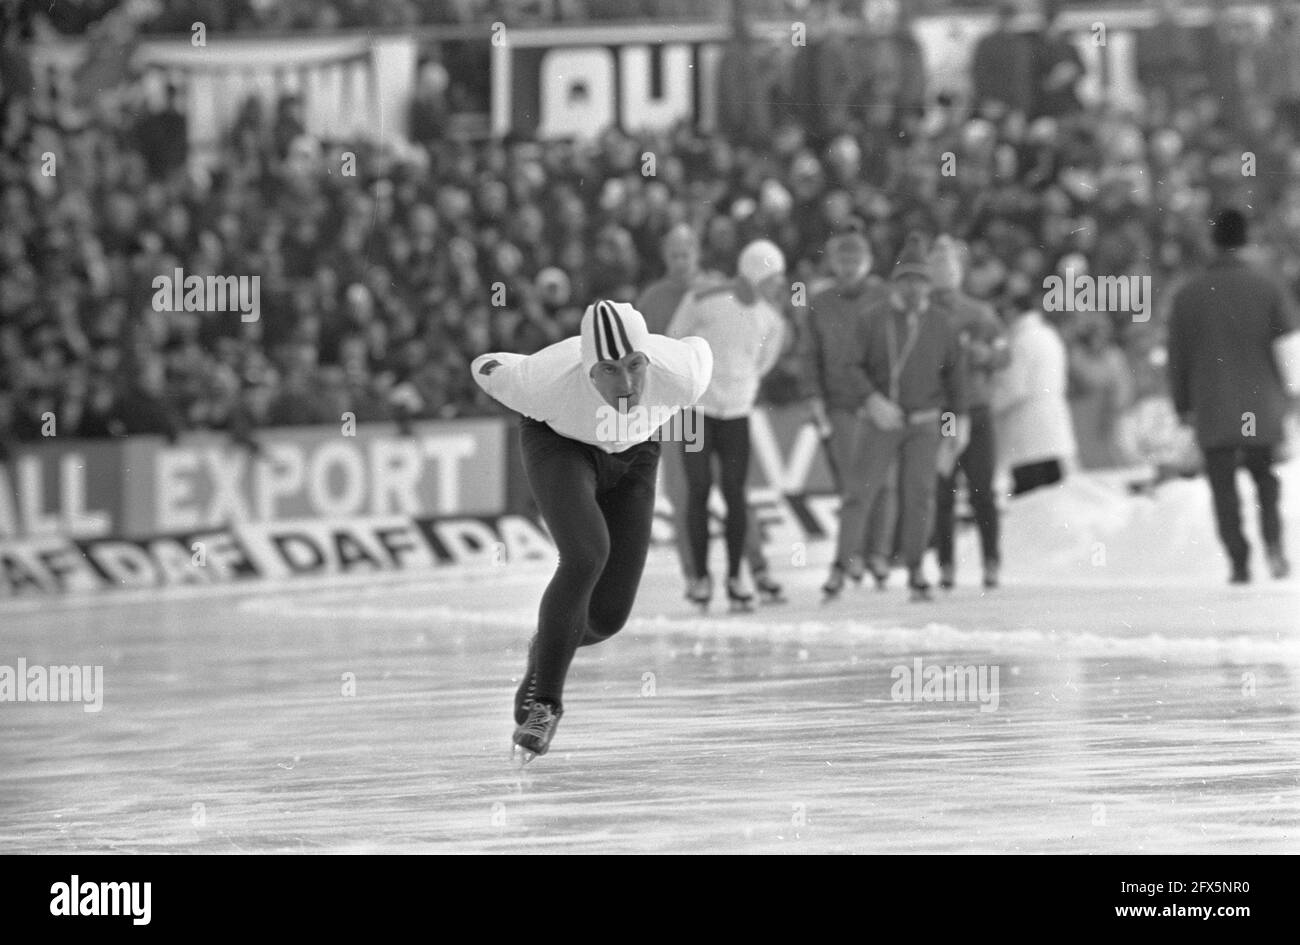 World Speed Skating Championships (men) at Deventer nr. 25, 26: F.A. Maier in action, February 16, 1969, SCATING, sports, world championships, The Netherlands, 20th century press agency photo, news to remember, documentary, historic photography 1945-1990, visual stories, human history of the Twentieth Century, capturing moments in time Stock Photo